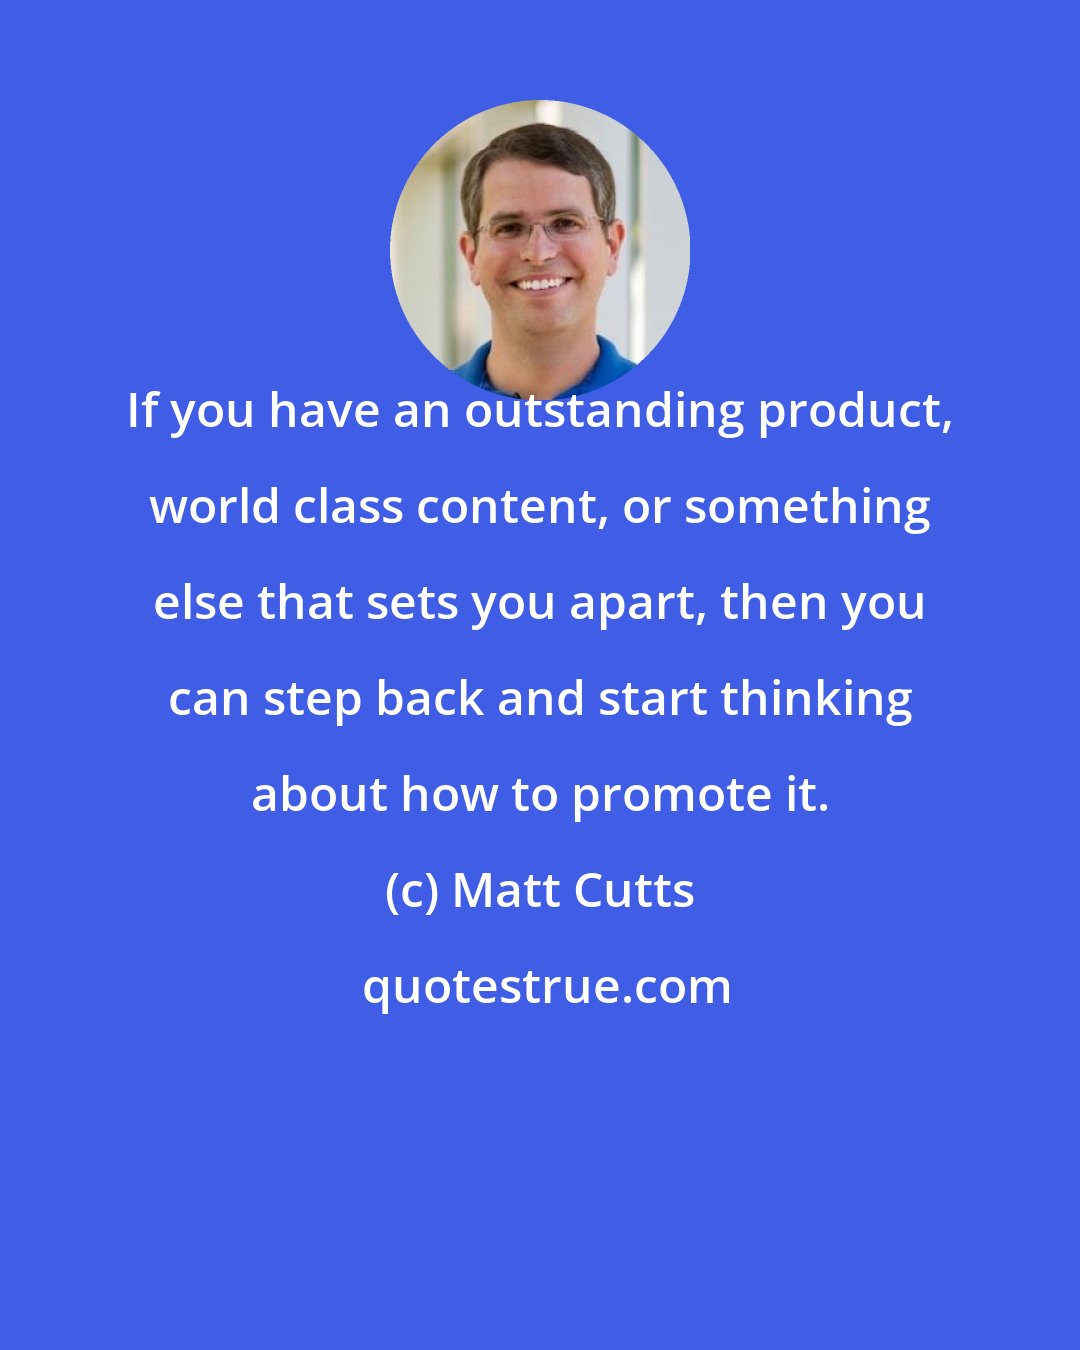 Matt Cutts: If you have an outstanding product, world class content, or something else that sets you apart, then you can step back and start thinking about how to promote it.